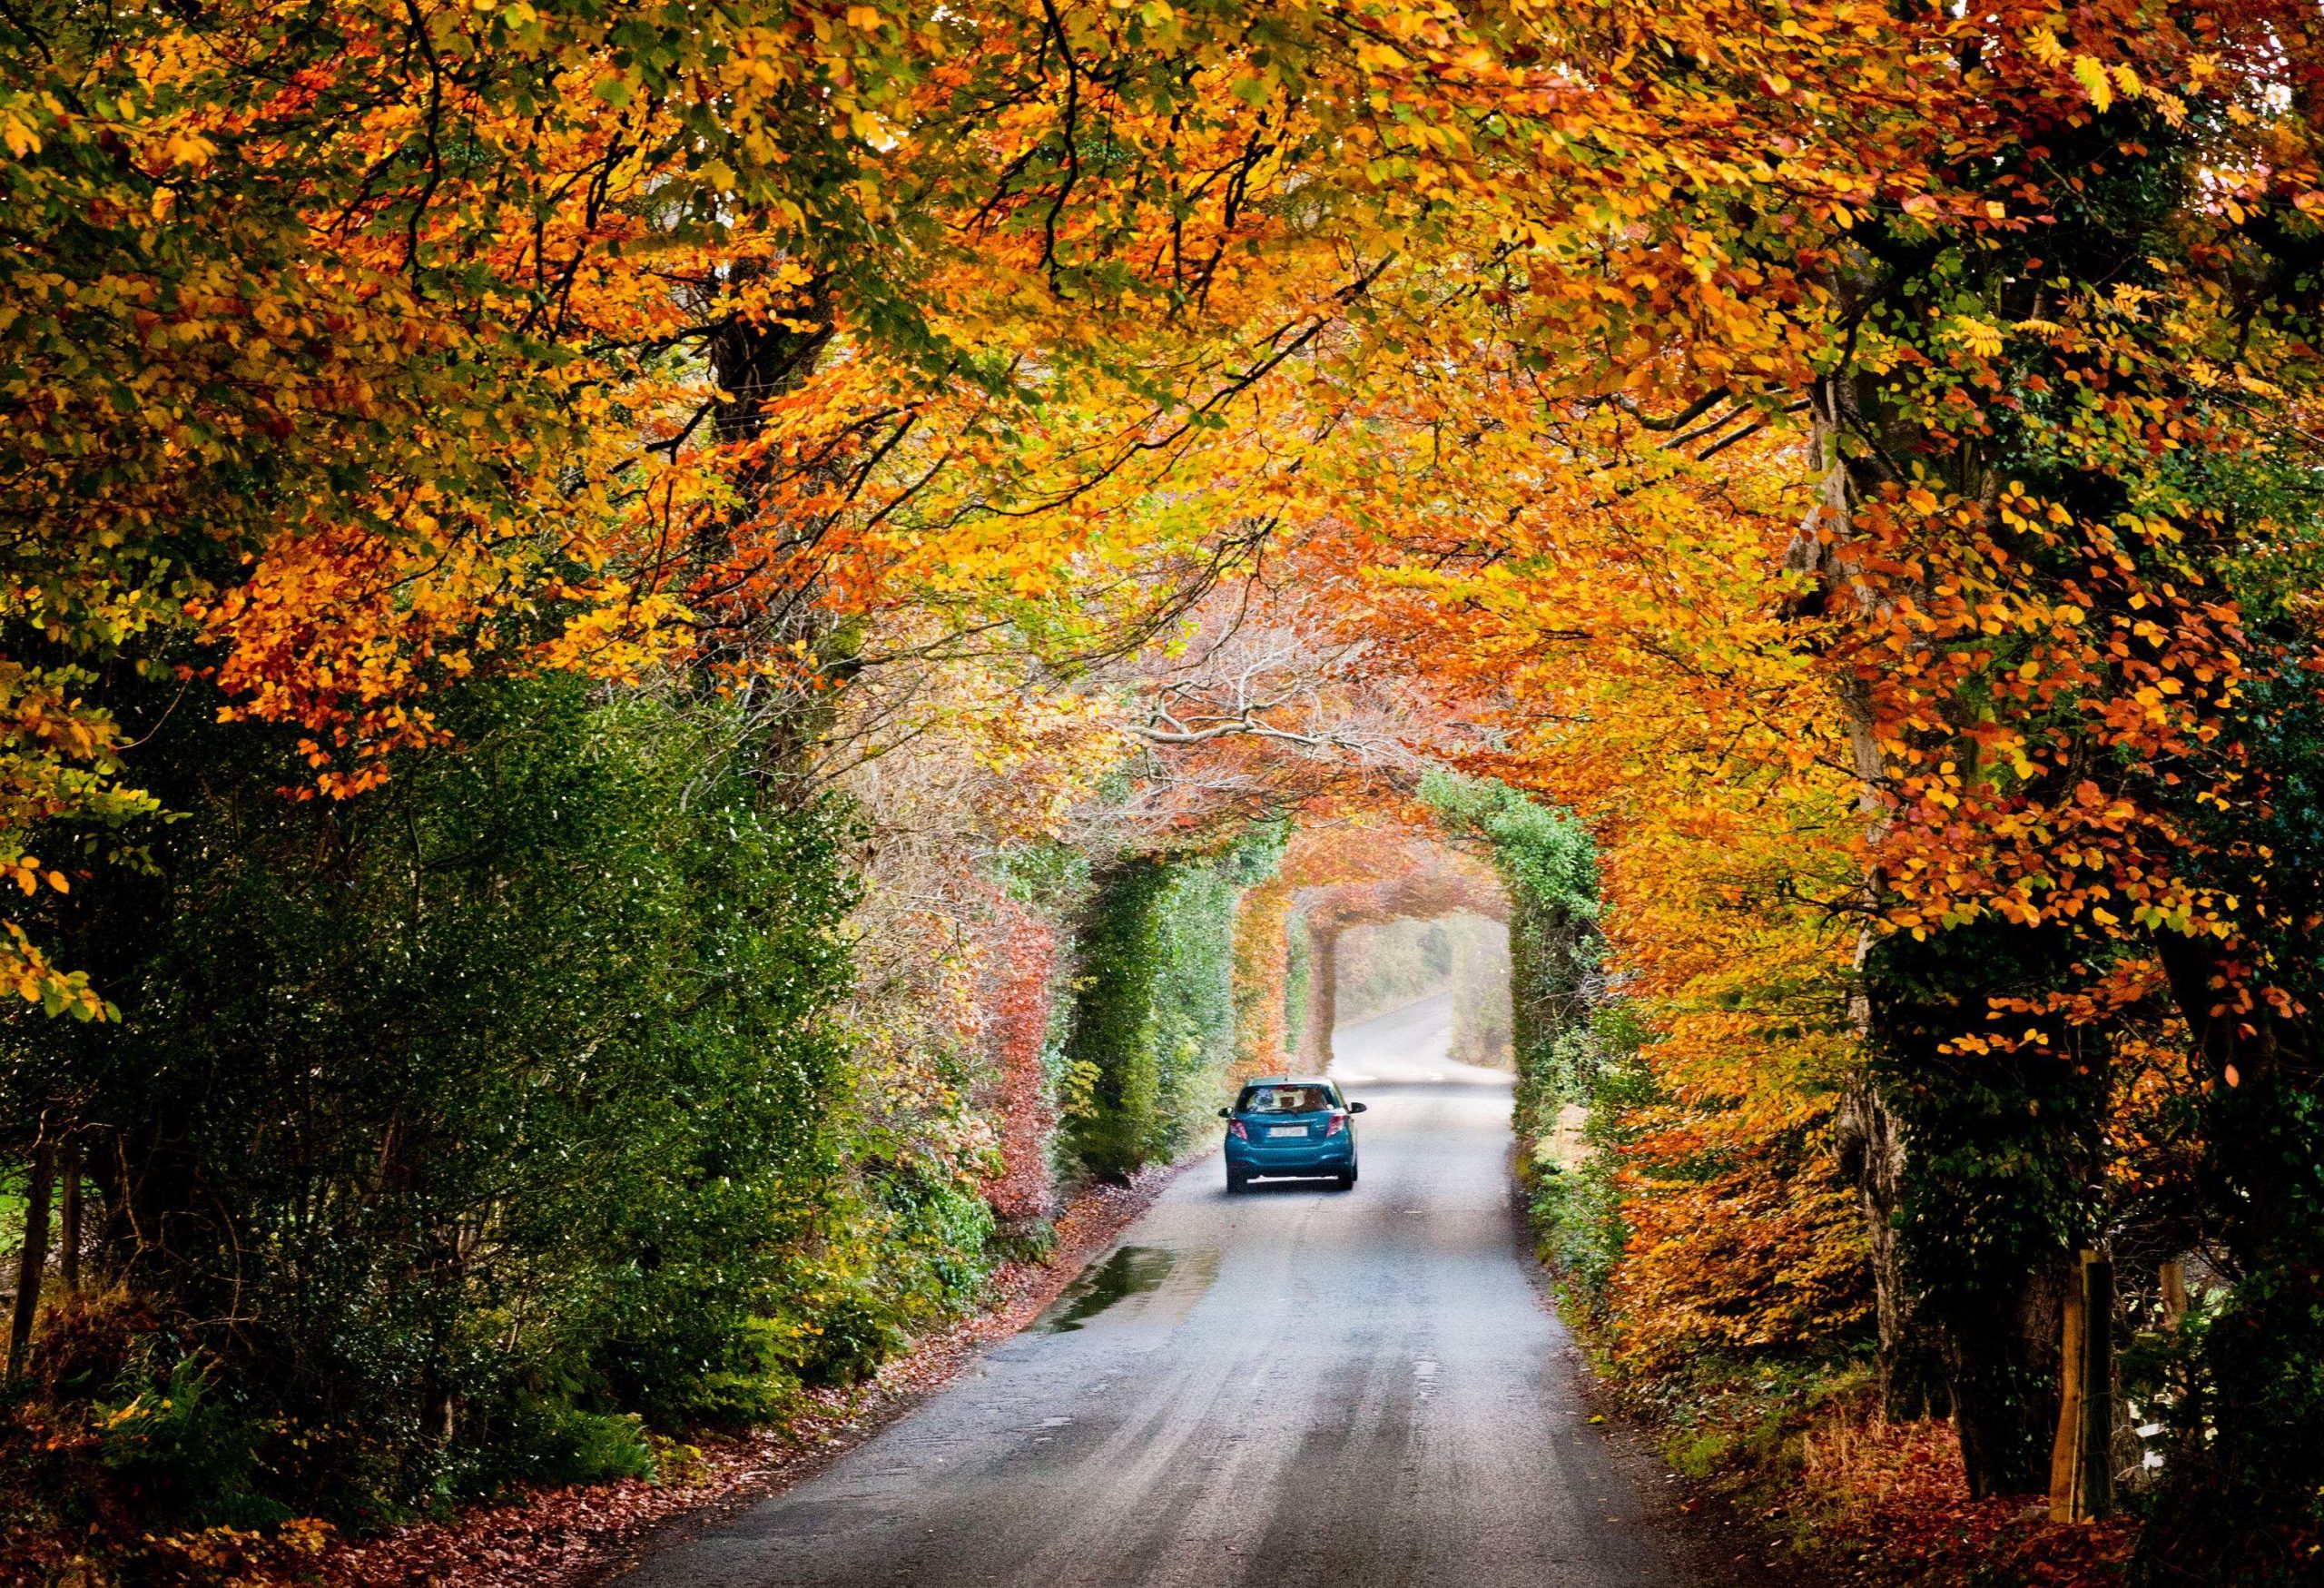 A blue car passing through a tunnel of autumn trees with yellow, red, and orange shades.